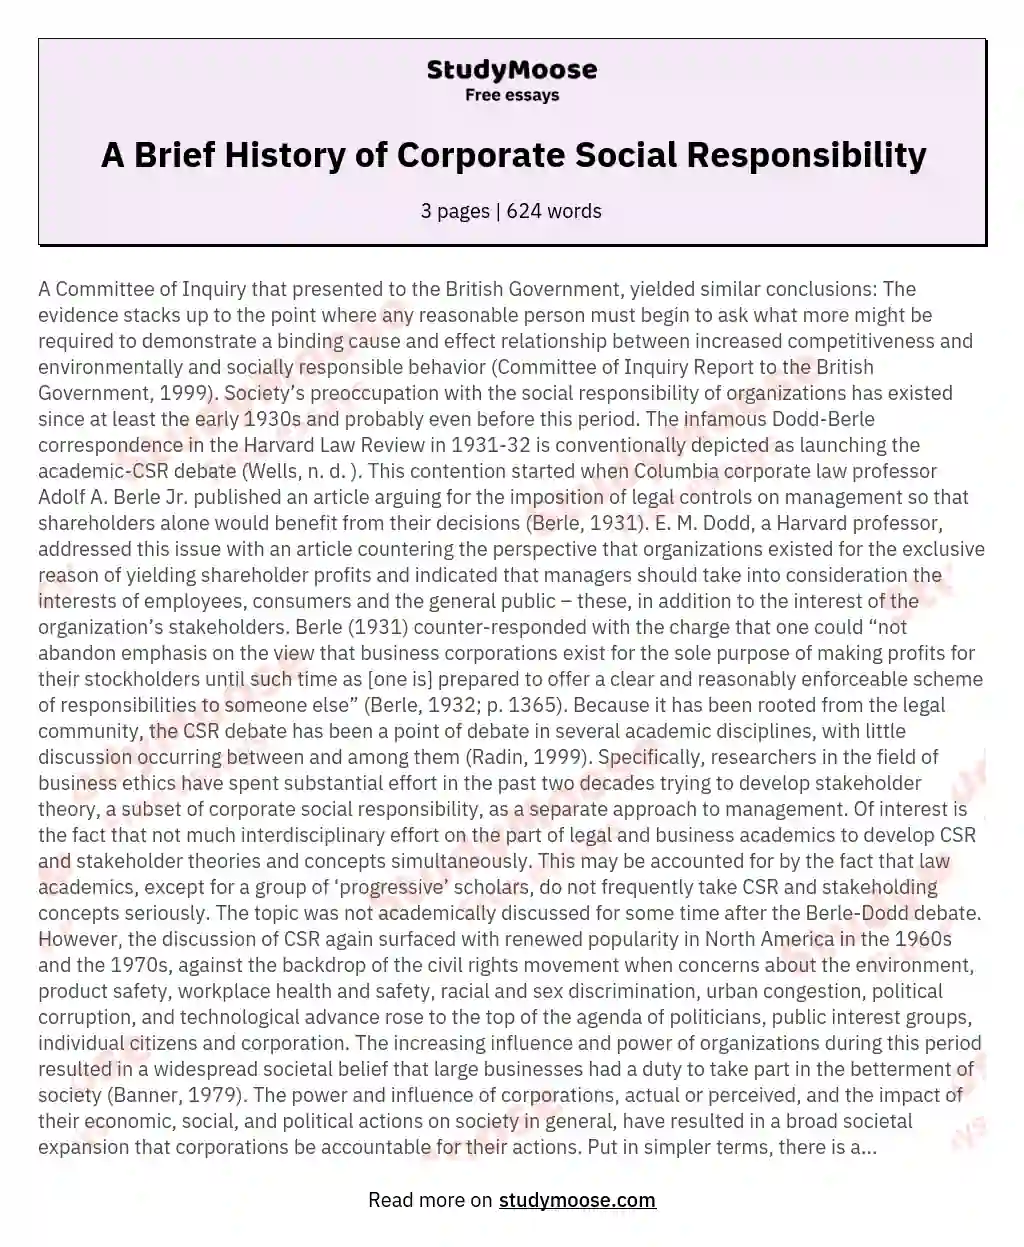 A Brief History of Corporate Social Responsibility essay